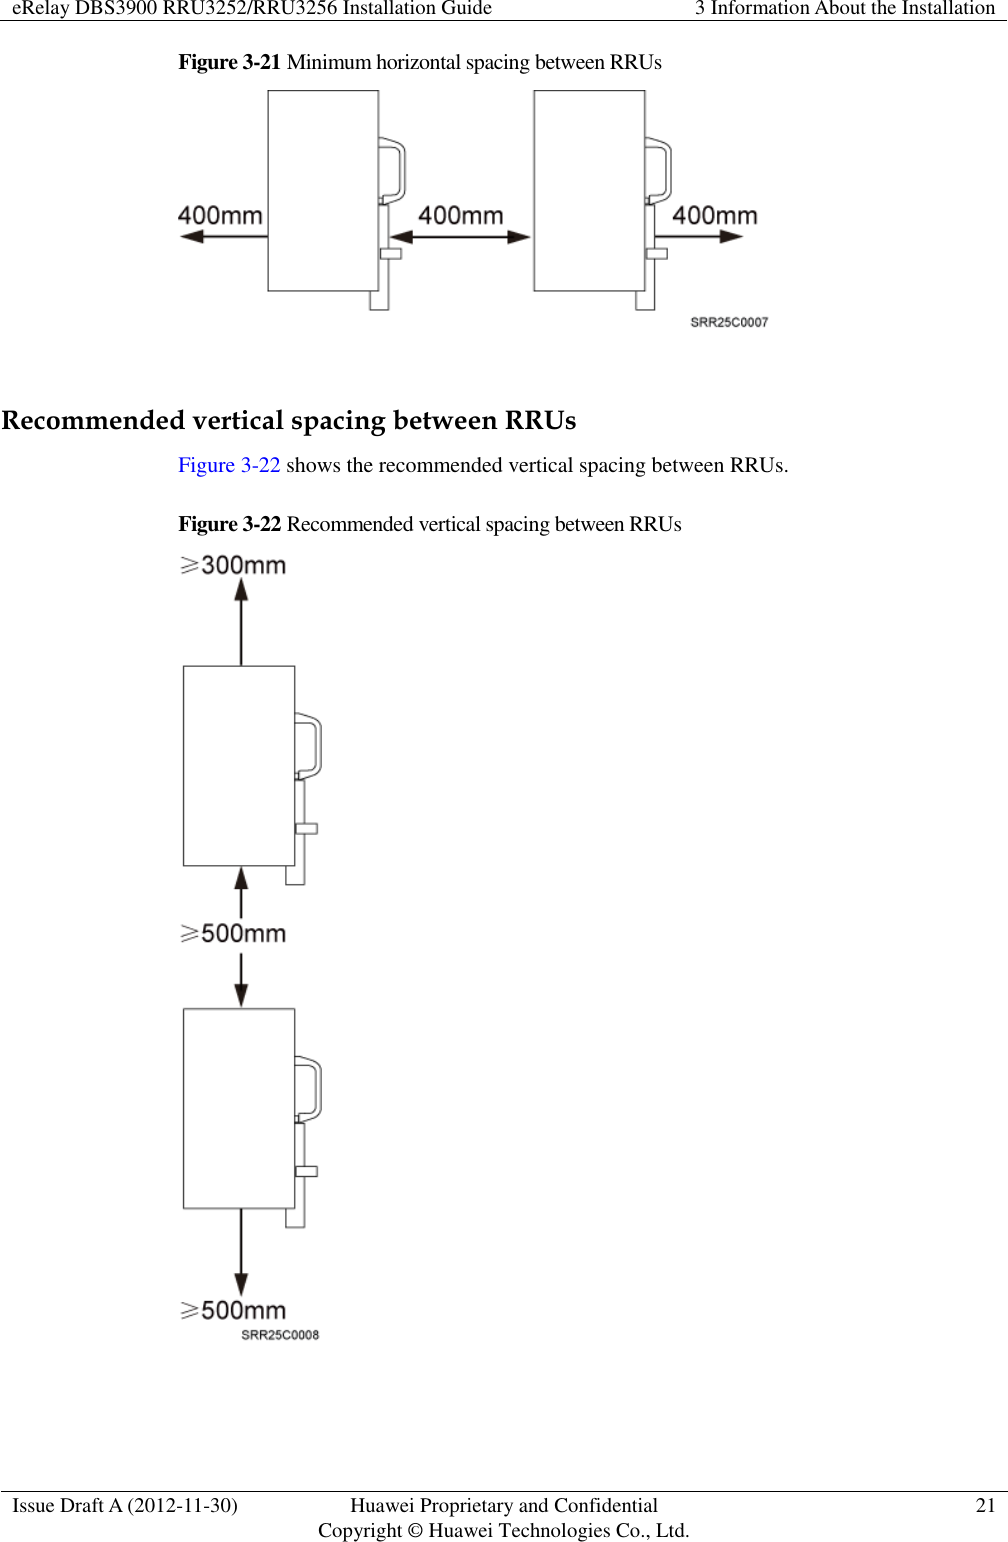 eRelay DBS3900 RRU3252/RRU3256 Installation Guide 3 Information About the Installation  Issue Draft A (2012-11-30) Huawei Proprietary and Confidential                                     Copyright © Huawei Technologies Co., Ltd. 21  Figure 3-21 Minimum horizontal spacing between RRUs   Recommended vertical spacing between RRUs Figure 3-22 shows the recommended vertical spacing between RRUs. Figure 3-22 Recommended vertical spacing between RRUs   